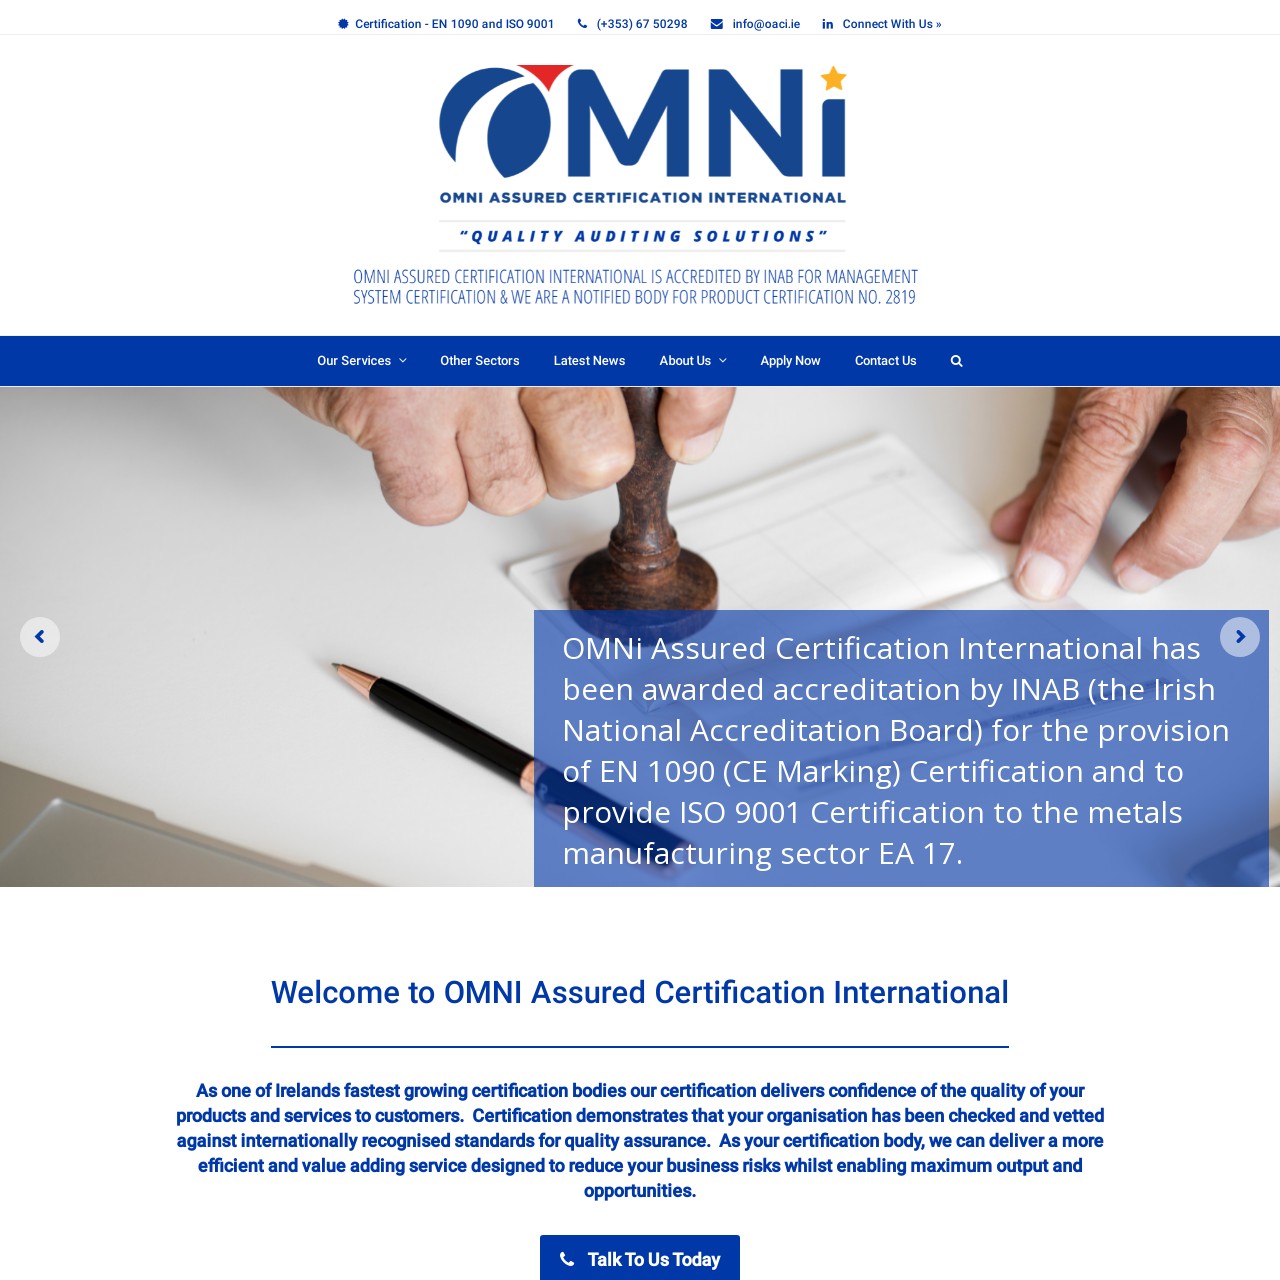 OMNI Assured Certification International - Accredited EN 1090 and ISO Certification